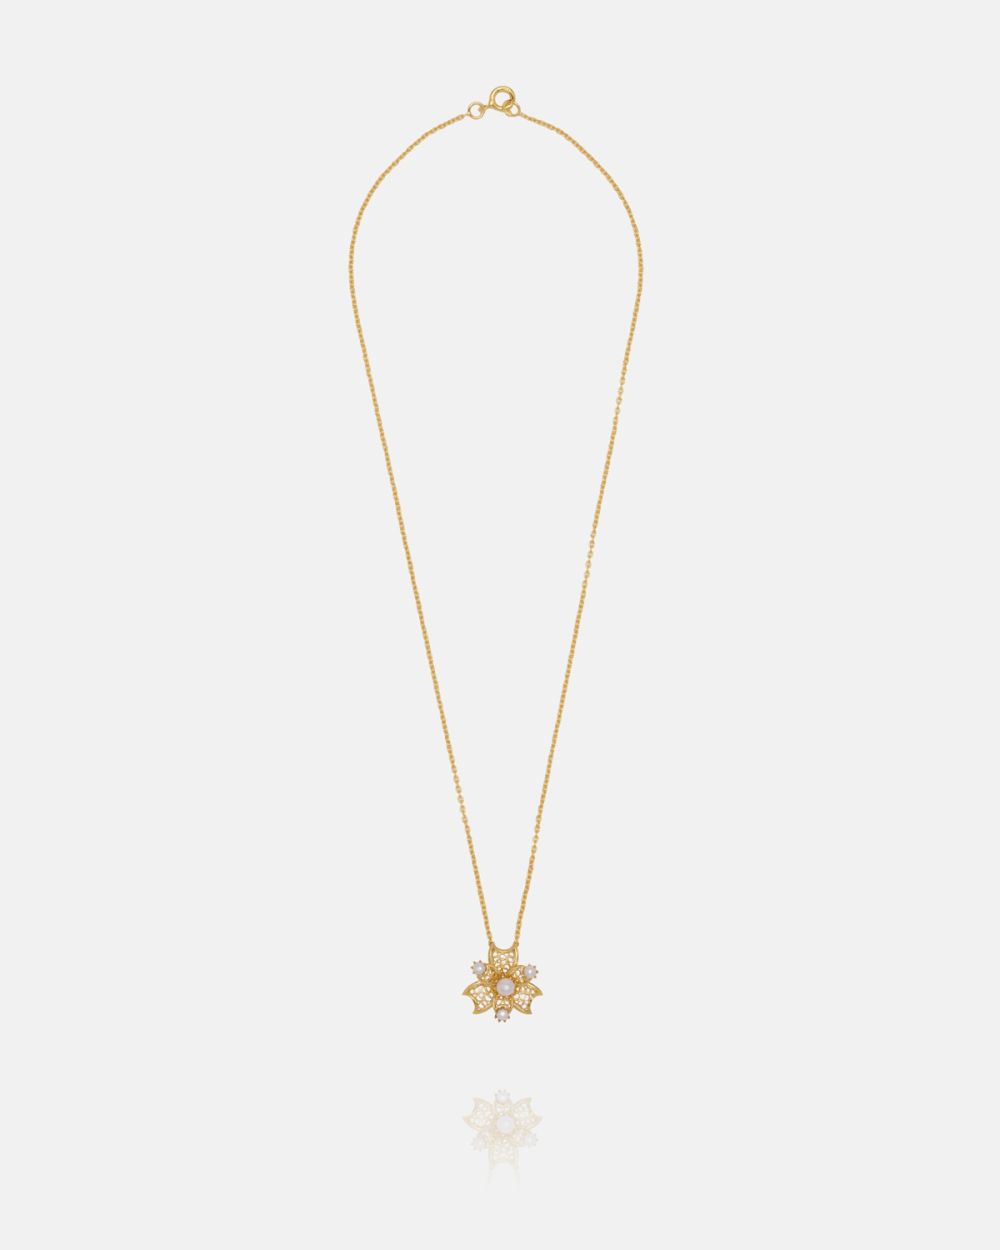 AJ Yellow Gold Necklace 80%